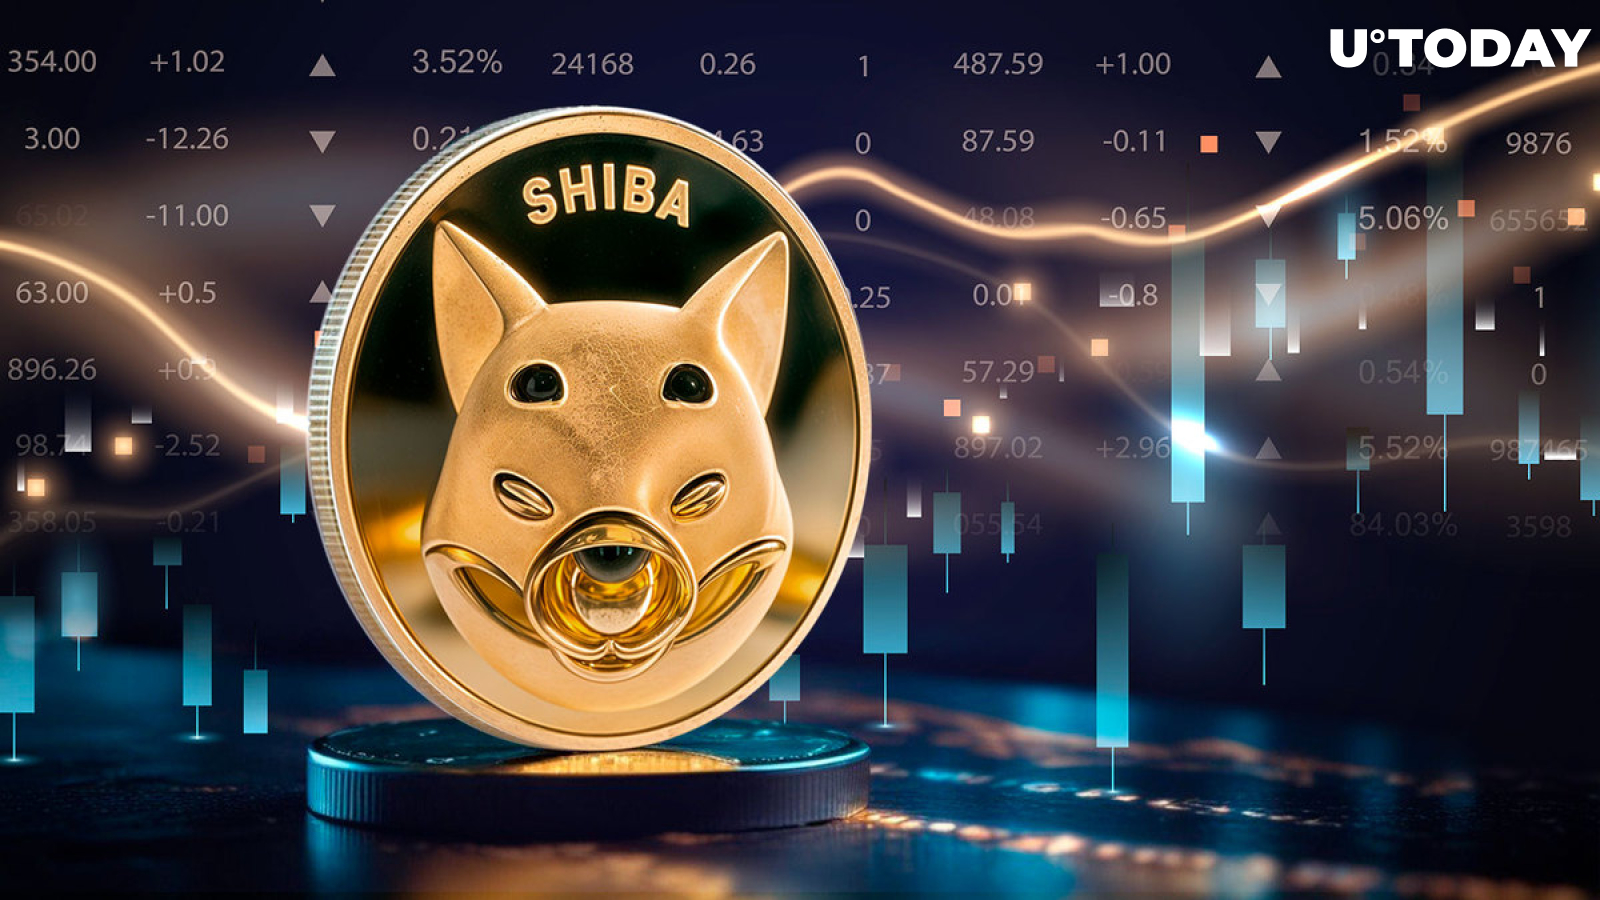 Shiba Inu on Verge of Epic Breakout as Price Jumps 10%